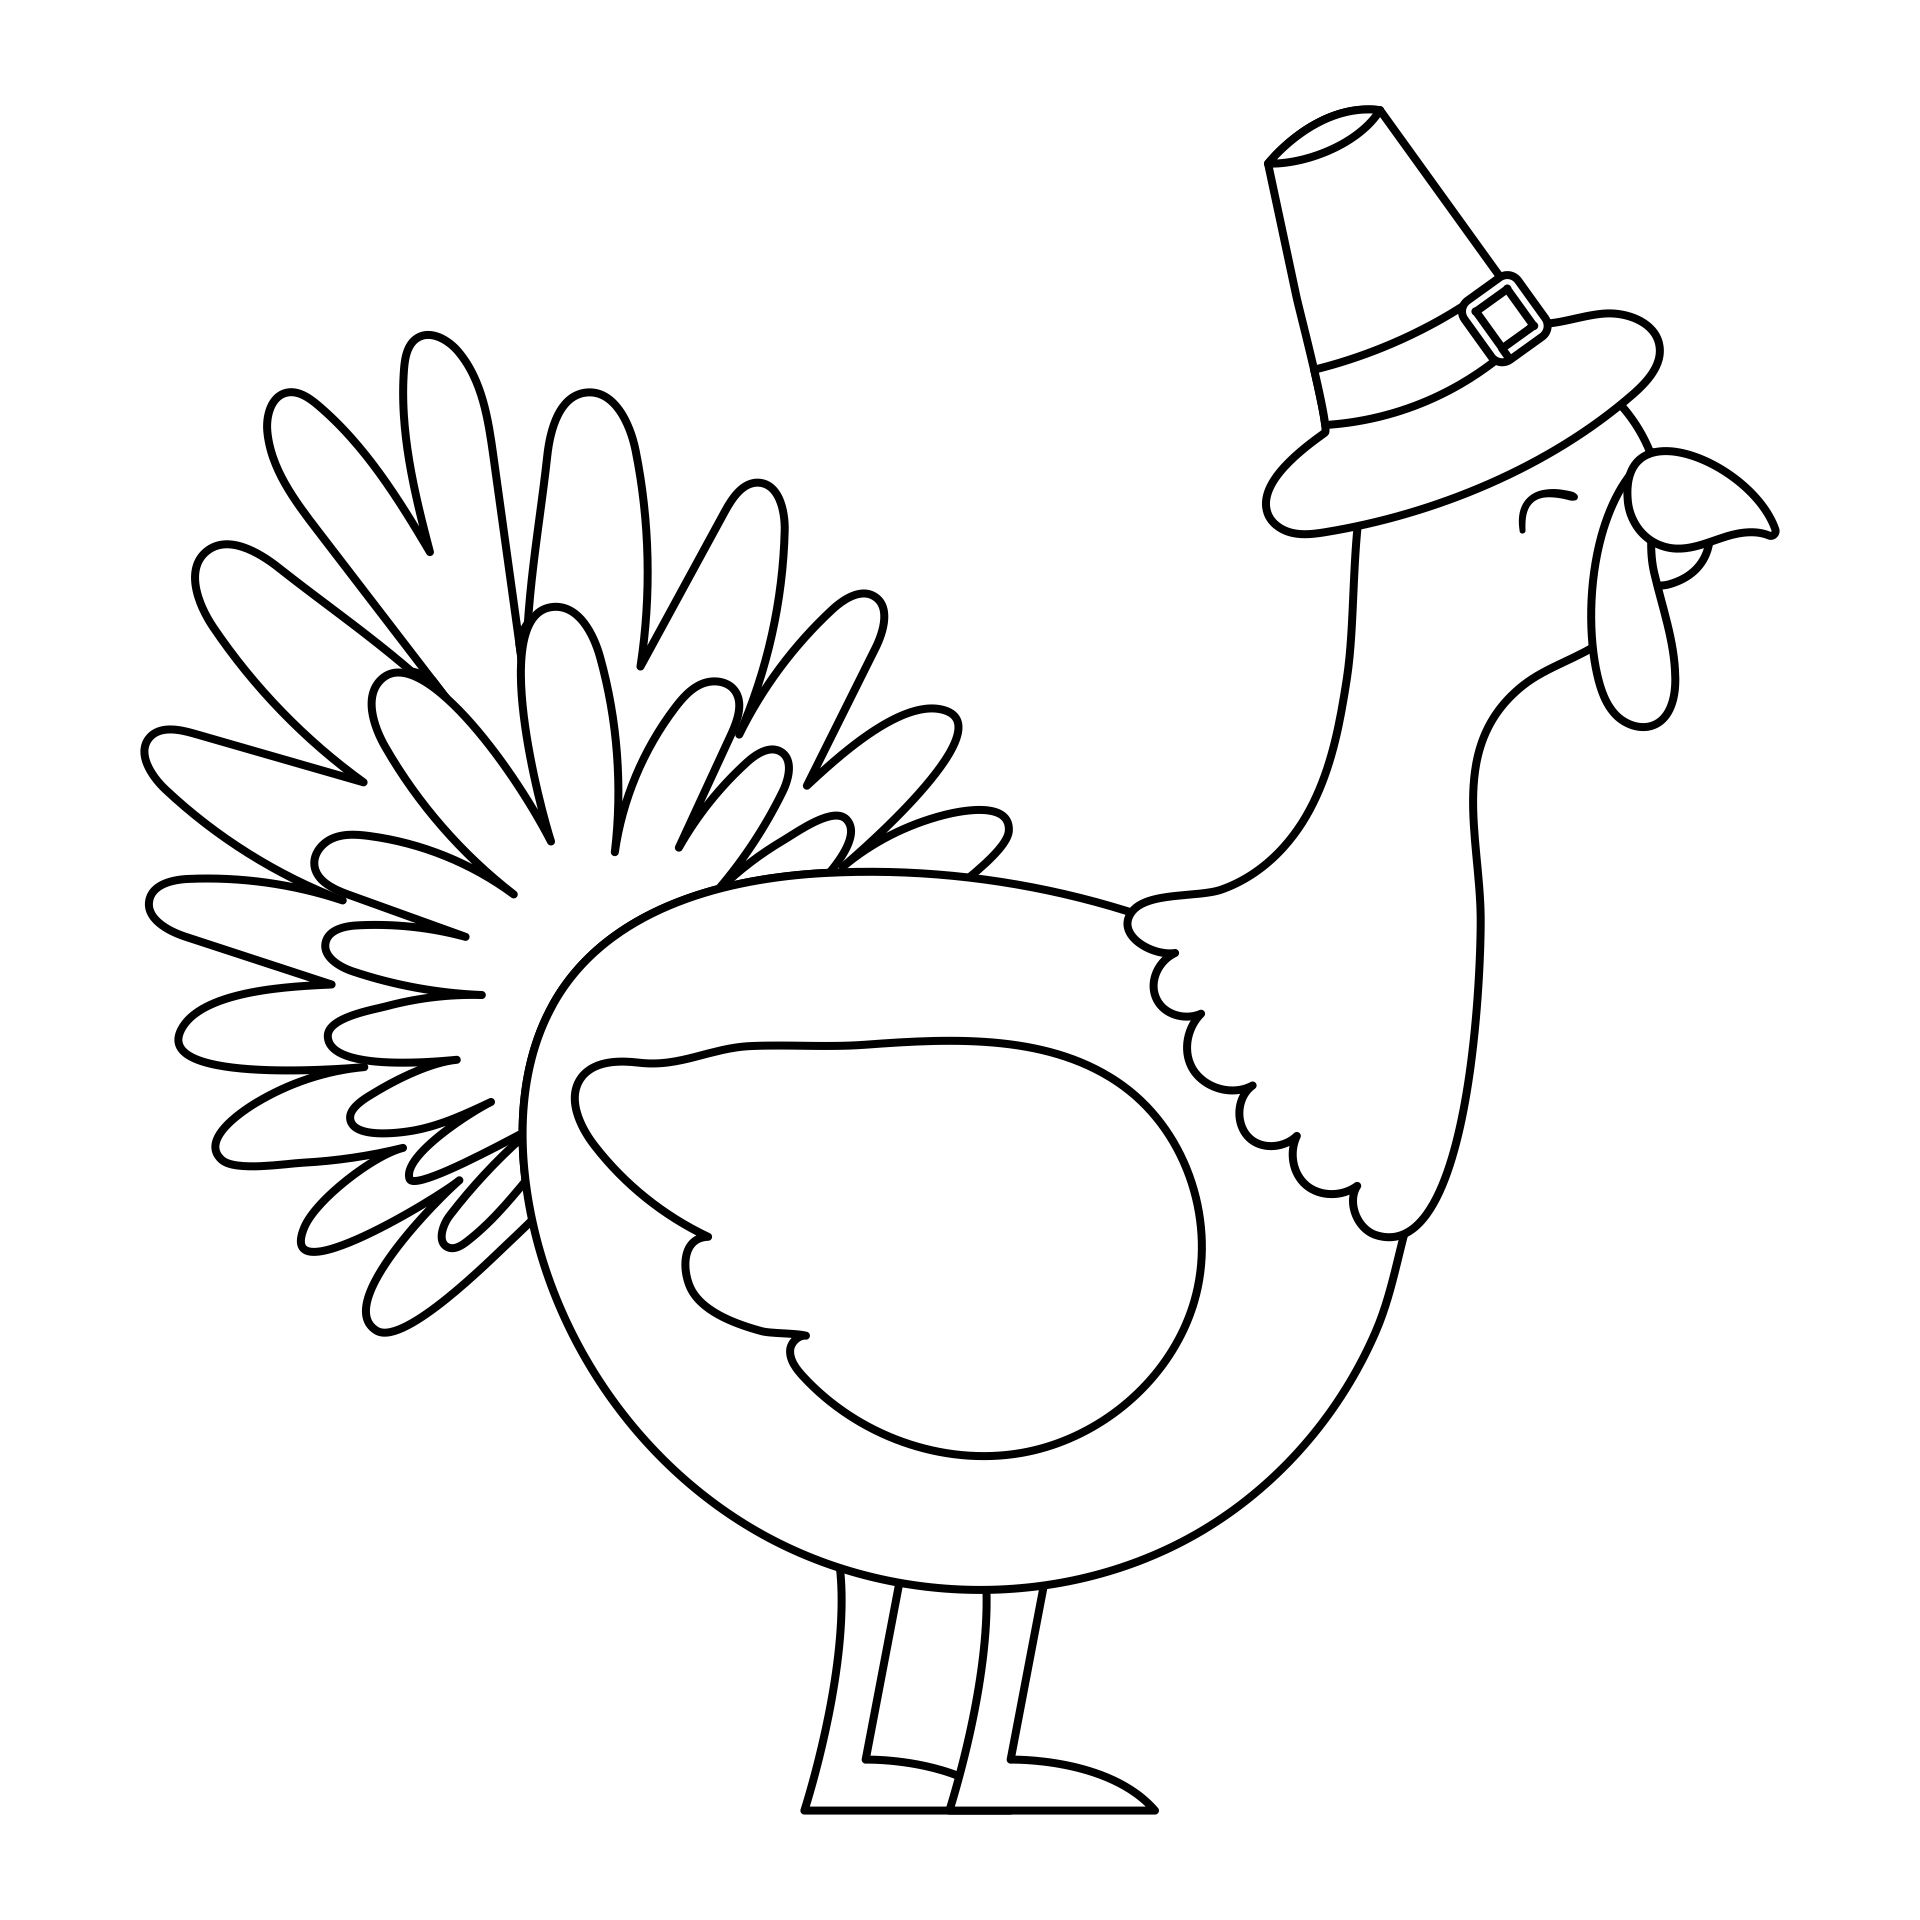 10 Best Thanksgiving Printable Activities PDF for Free at Printablee